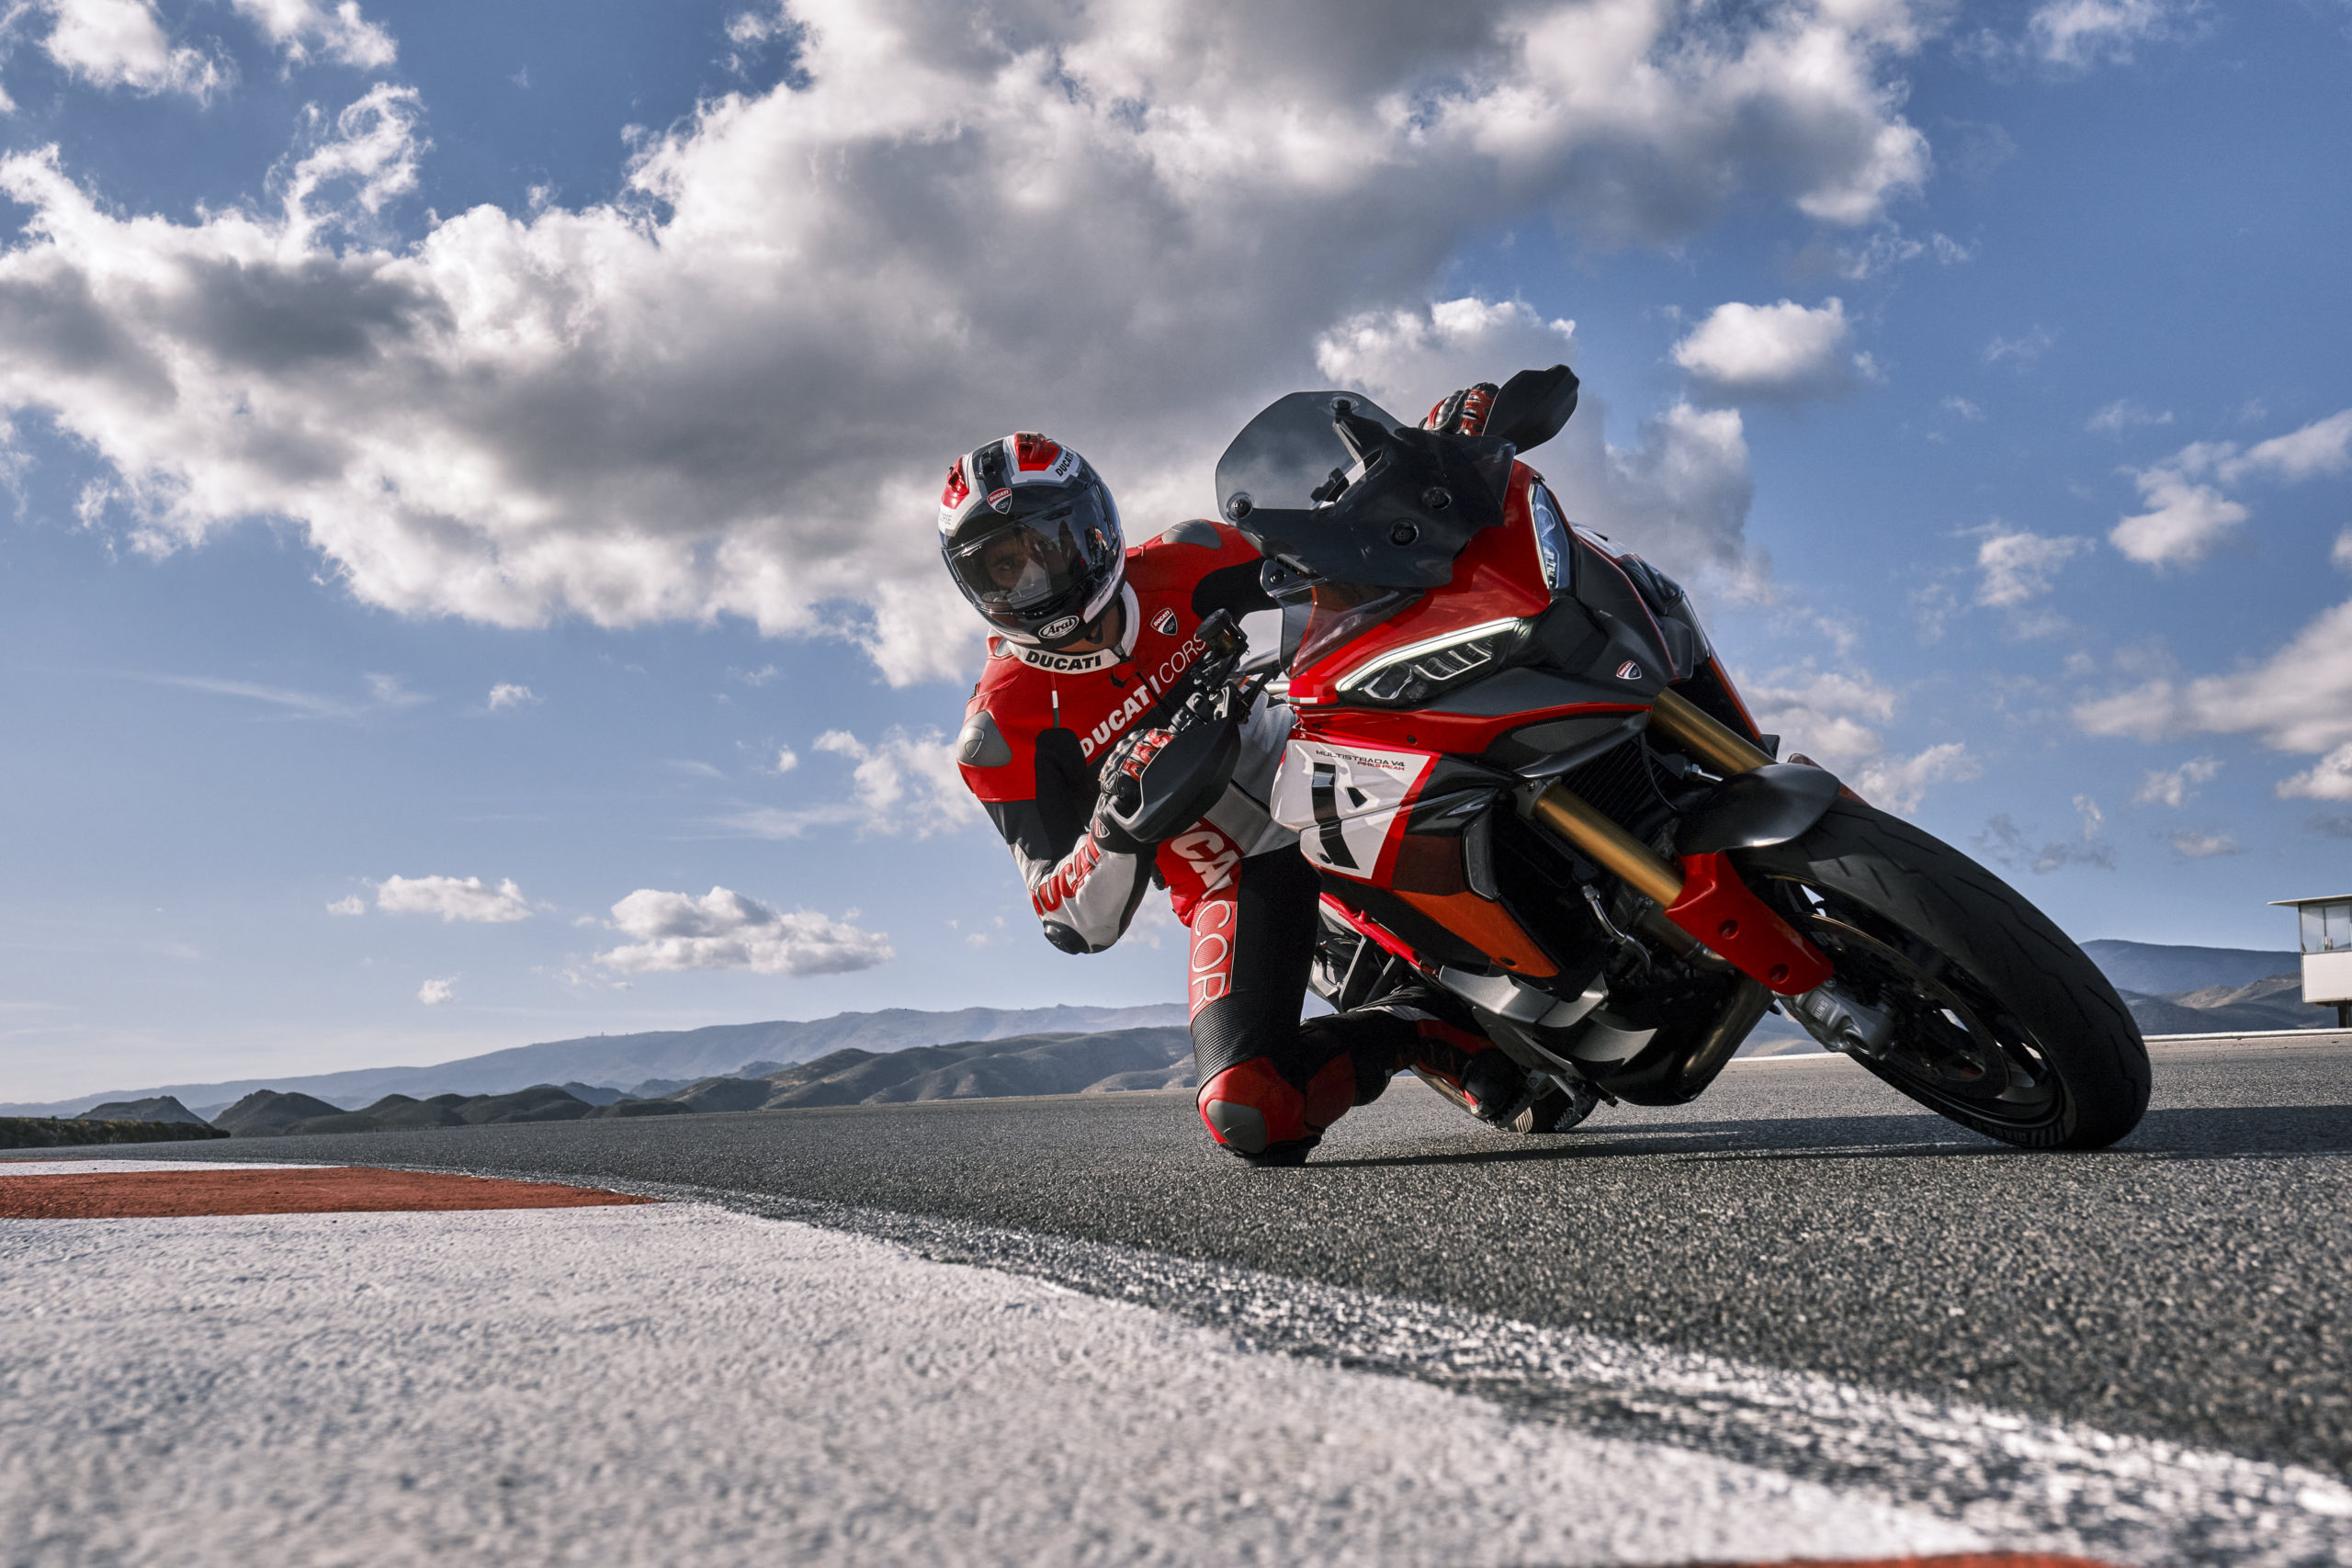 A side view of the new Multistrada V4 Pikes Peak from Ducati - the third motorcycle to be debuted in their World Premiere series